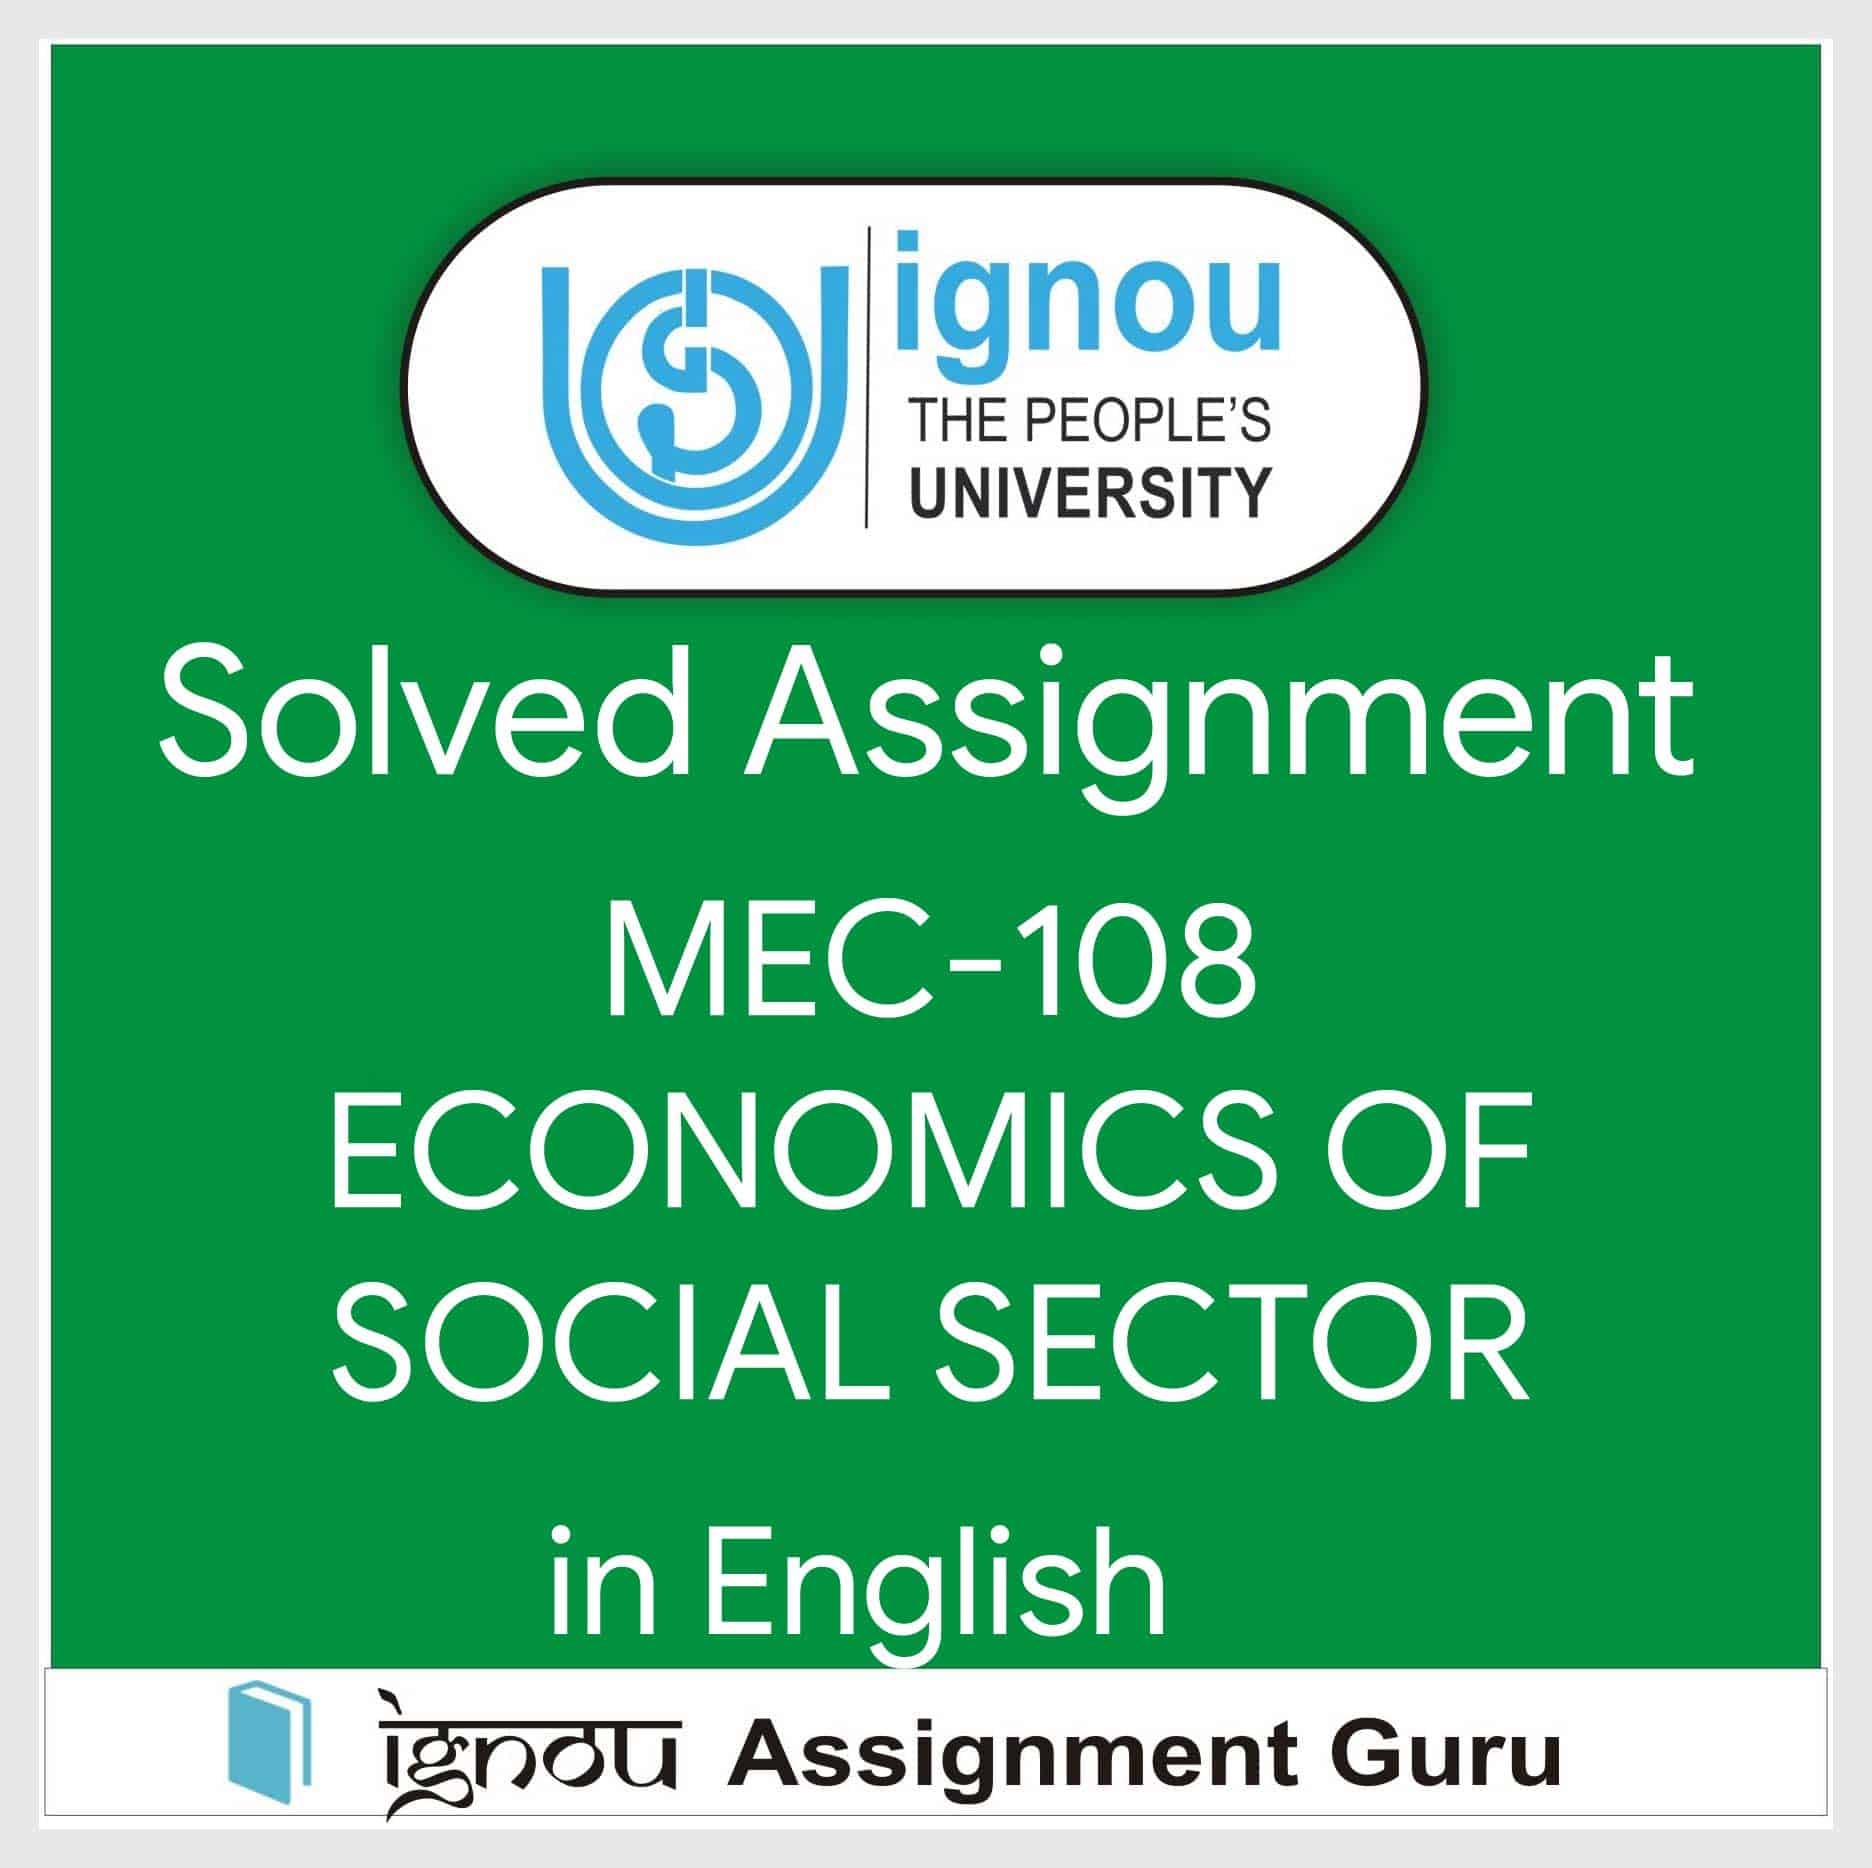 MEC-108 ECONOMICS OF SOCIAL SECTOR AND ENVIRONMENT in English Solved Assignment 2022-2023